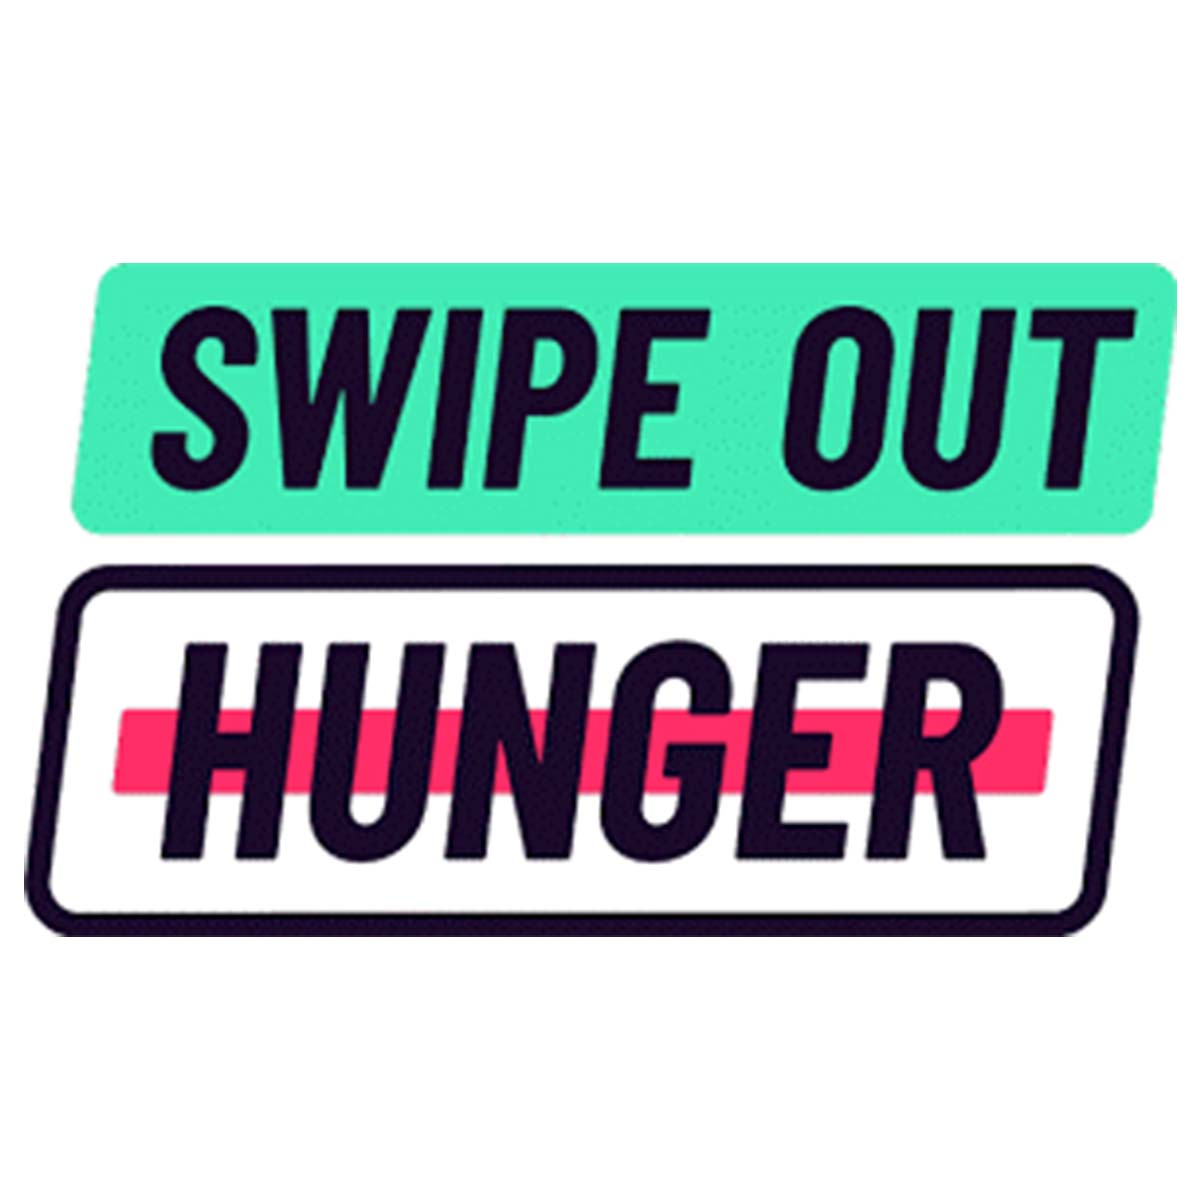 Idaho Eats Swipe Out Hunger program provides quick, short-term relief to current students, staff, and faculty.  